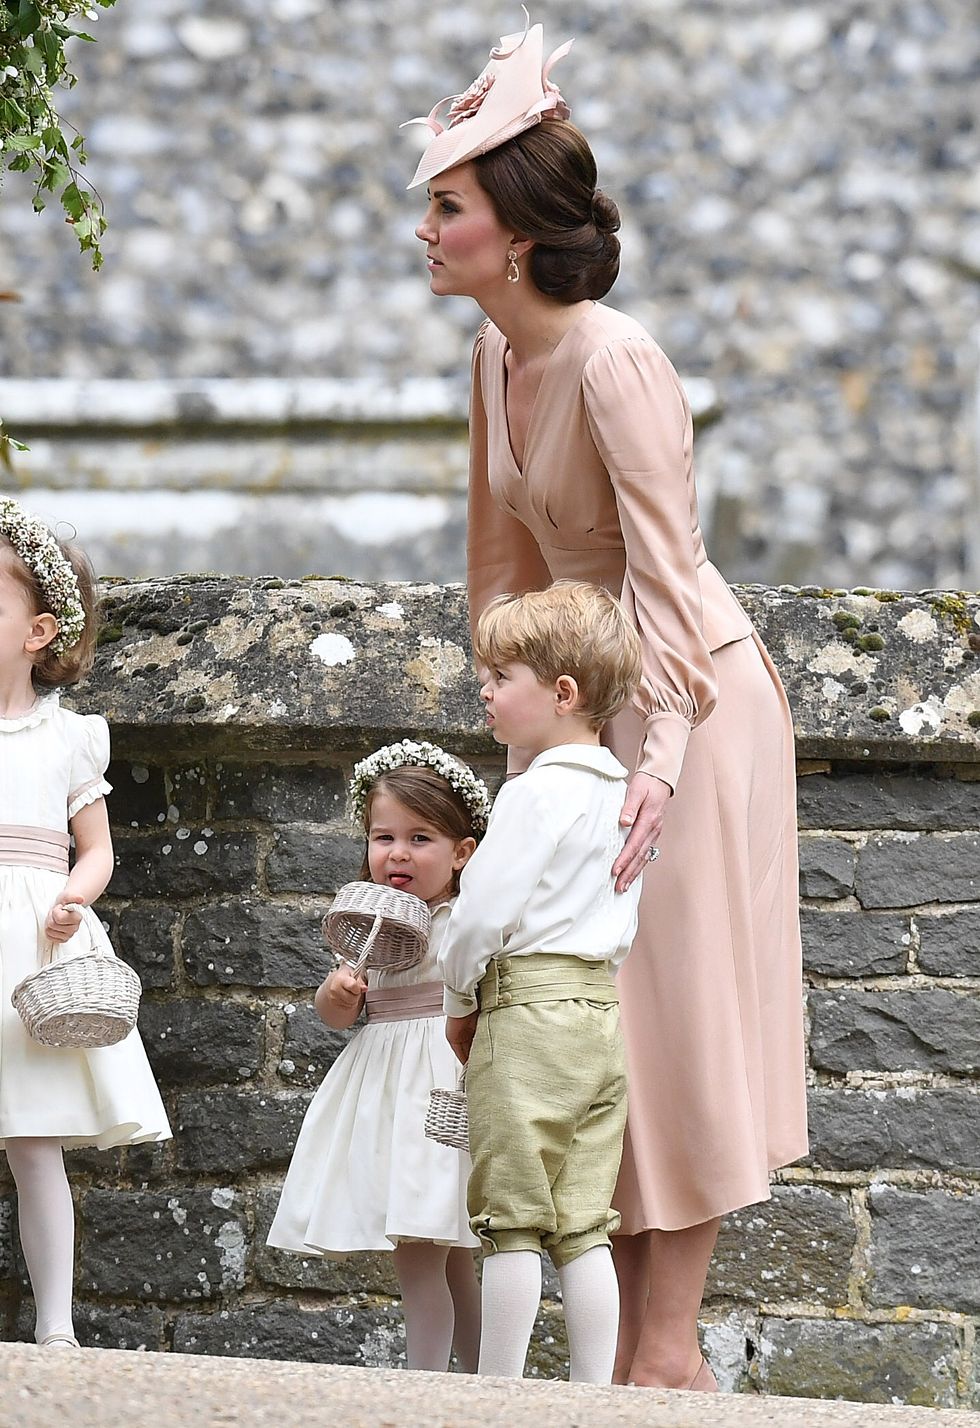 ENGLEFIELD GREEN, ENGLAND - MAY 20:  Catherine, Duchess of Cambridge, with  Prince George of Cambridge (R), page boy and Princess Charlotte of Cambridge (R), bridesmaid, after the wedding of Pippa Middleton and James Matthews at St Mark's Church on May 20, 2017 in Englefield Green, England.  (Photo by Samir Hussein/Samir Hussein/WireImage)